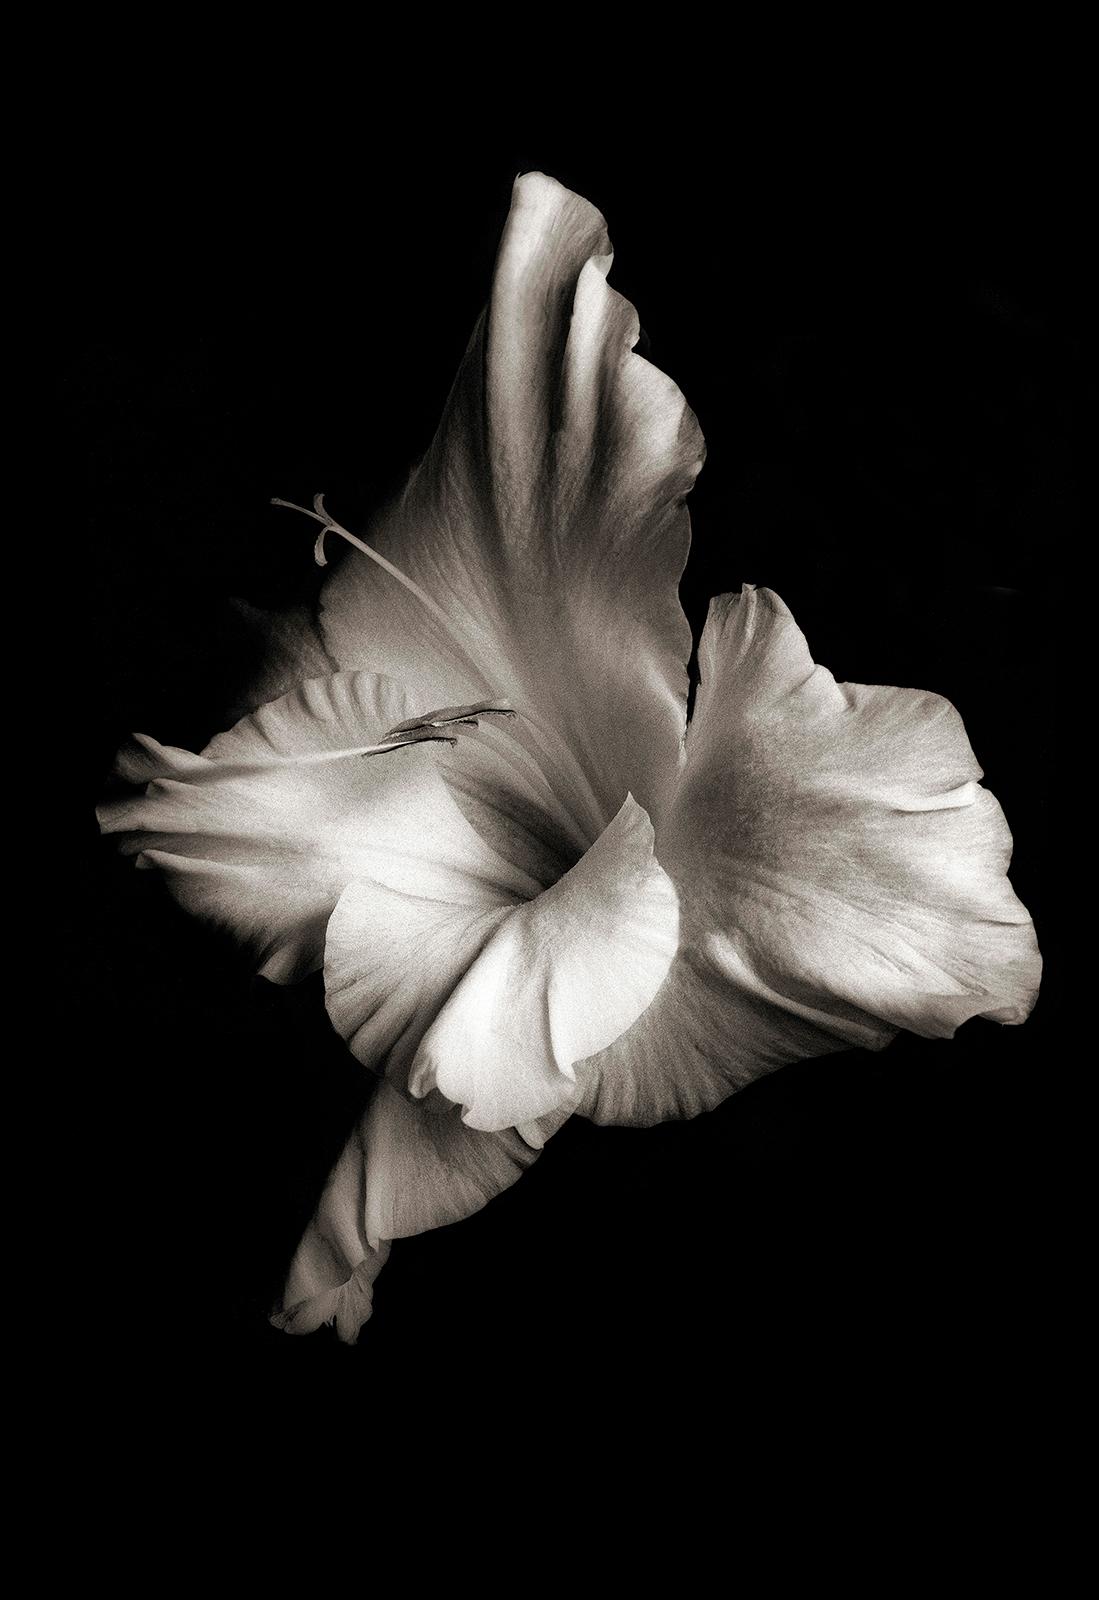 An original signed archival pigment print on Hahnemühle Photo Rag® Baryta 315 gsm paper by Scottish artist Ian Sanderson (1951- 2020) titled ‘FlowerHead 1 ‘ who was captured on film in 1986. 
Monochrome photography, slightly sepia.

Signed by Ian